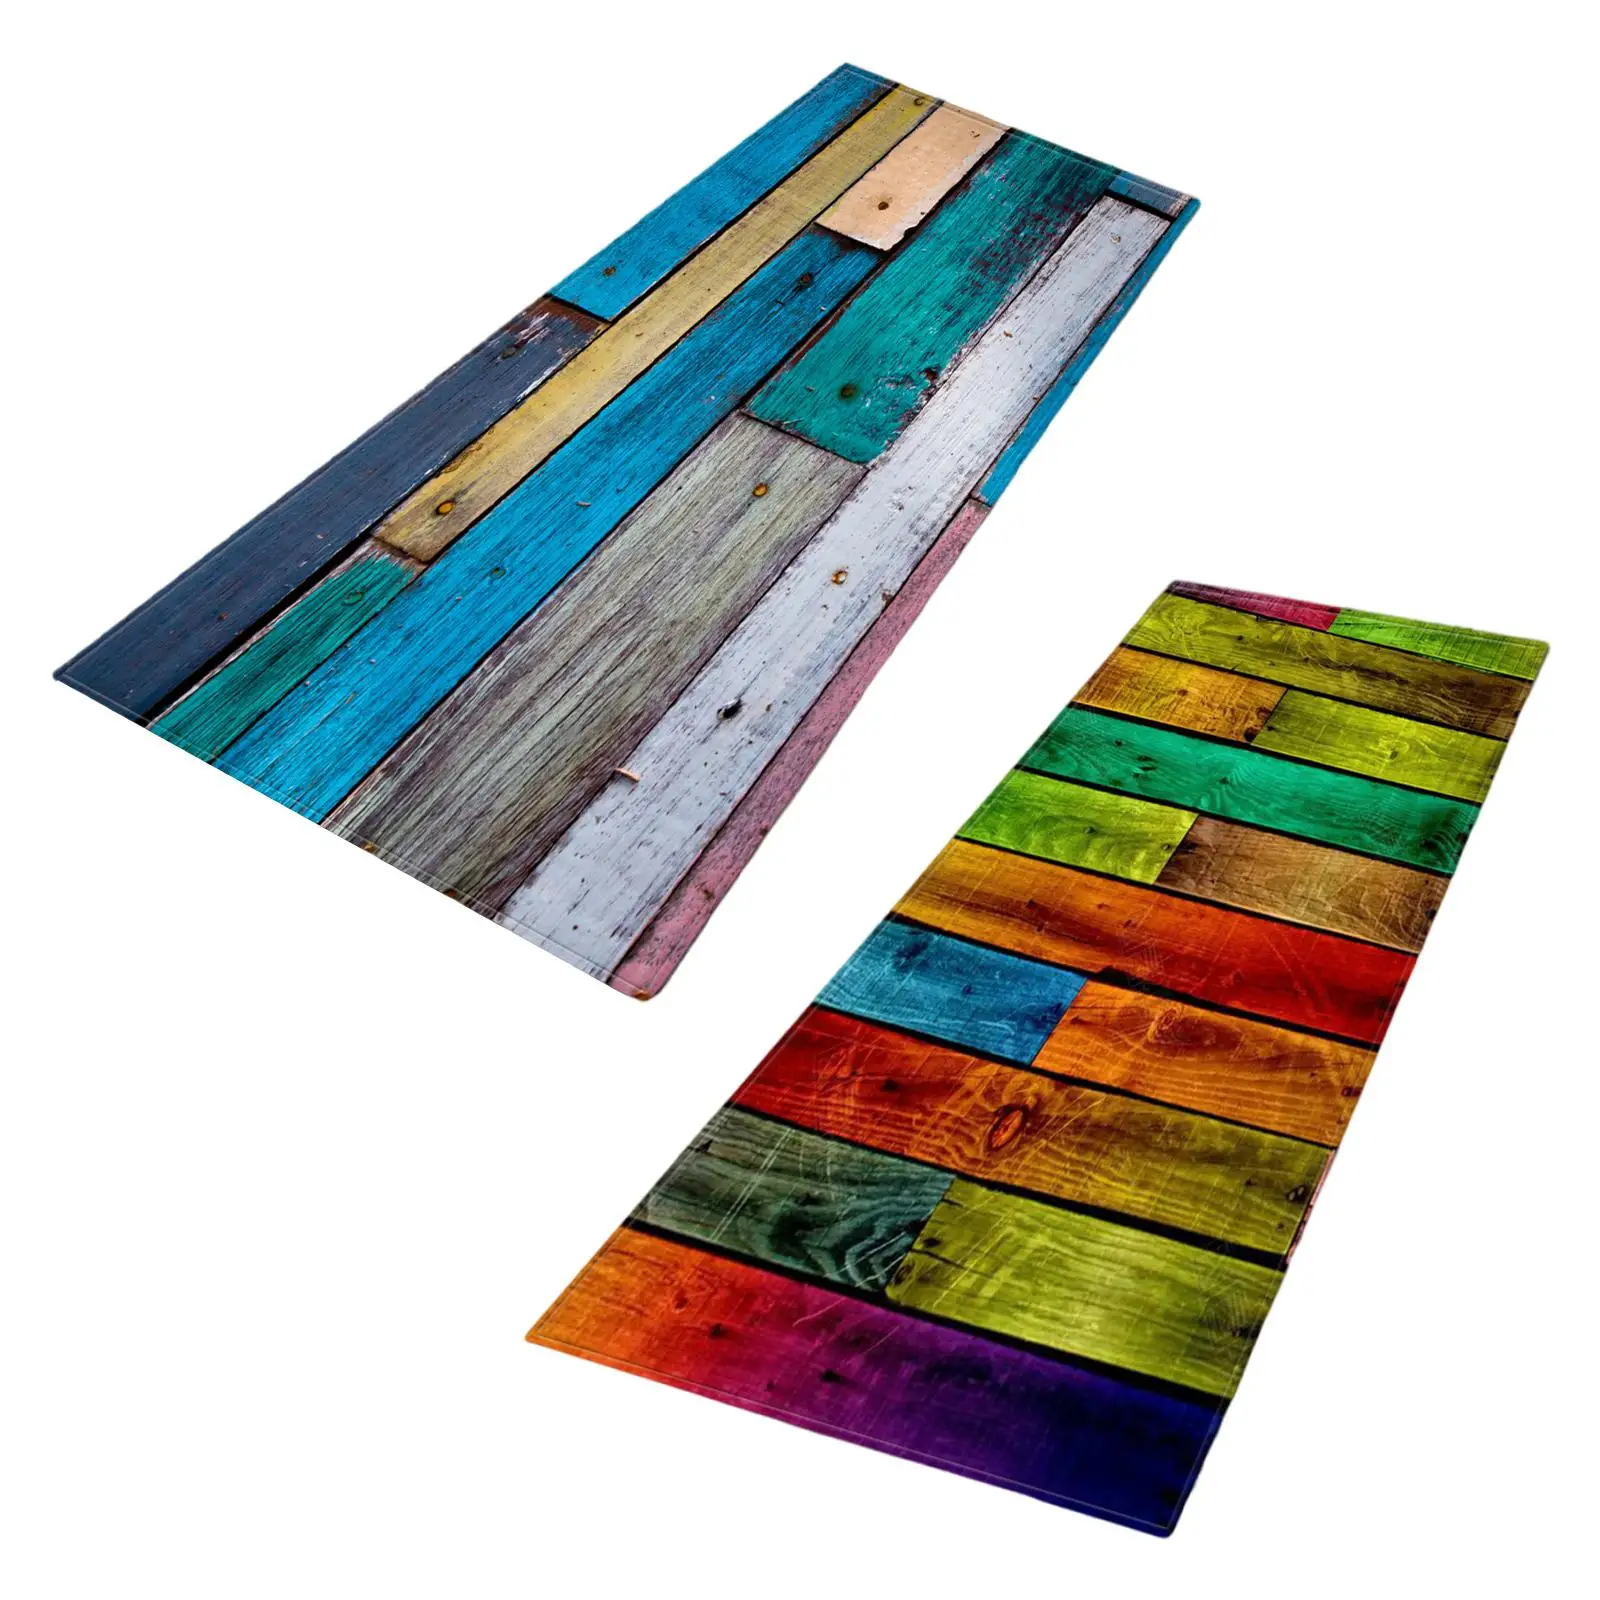 Modern Kitchen Rugs and Mats Rectangle Polyester Fiber Doormat 23.62x70.87inch Floor Planks for Apartment Home Decor Washable